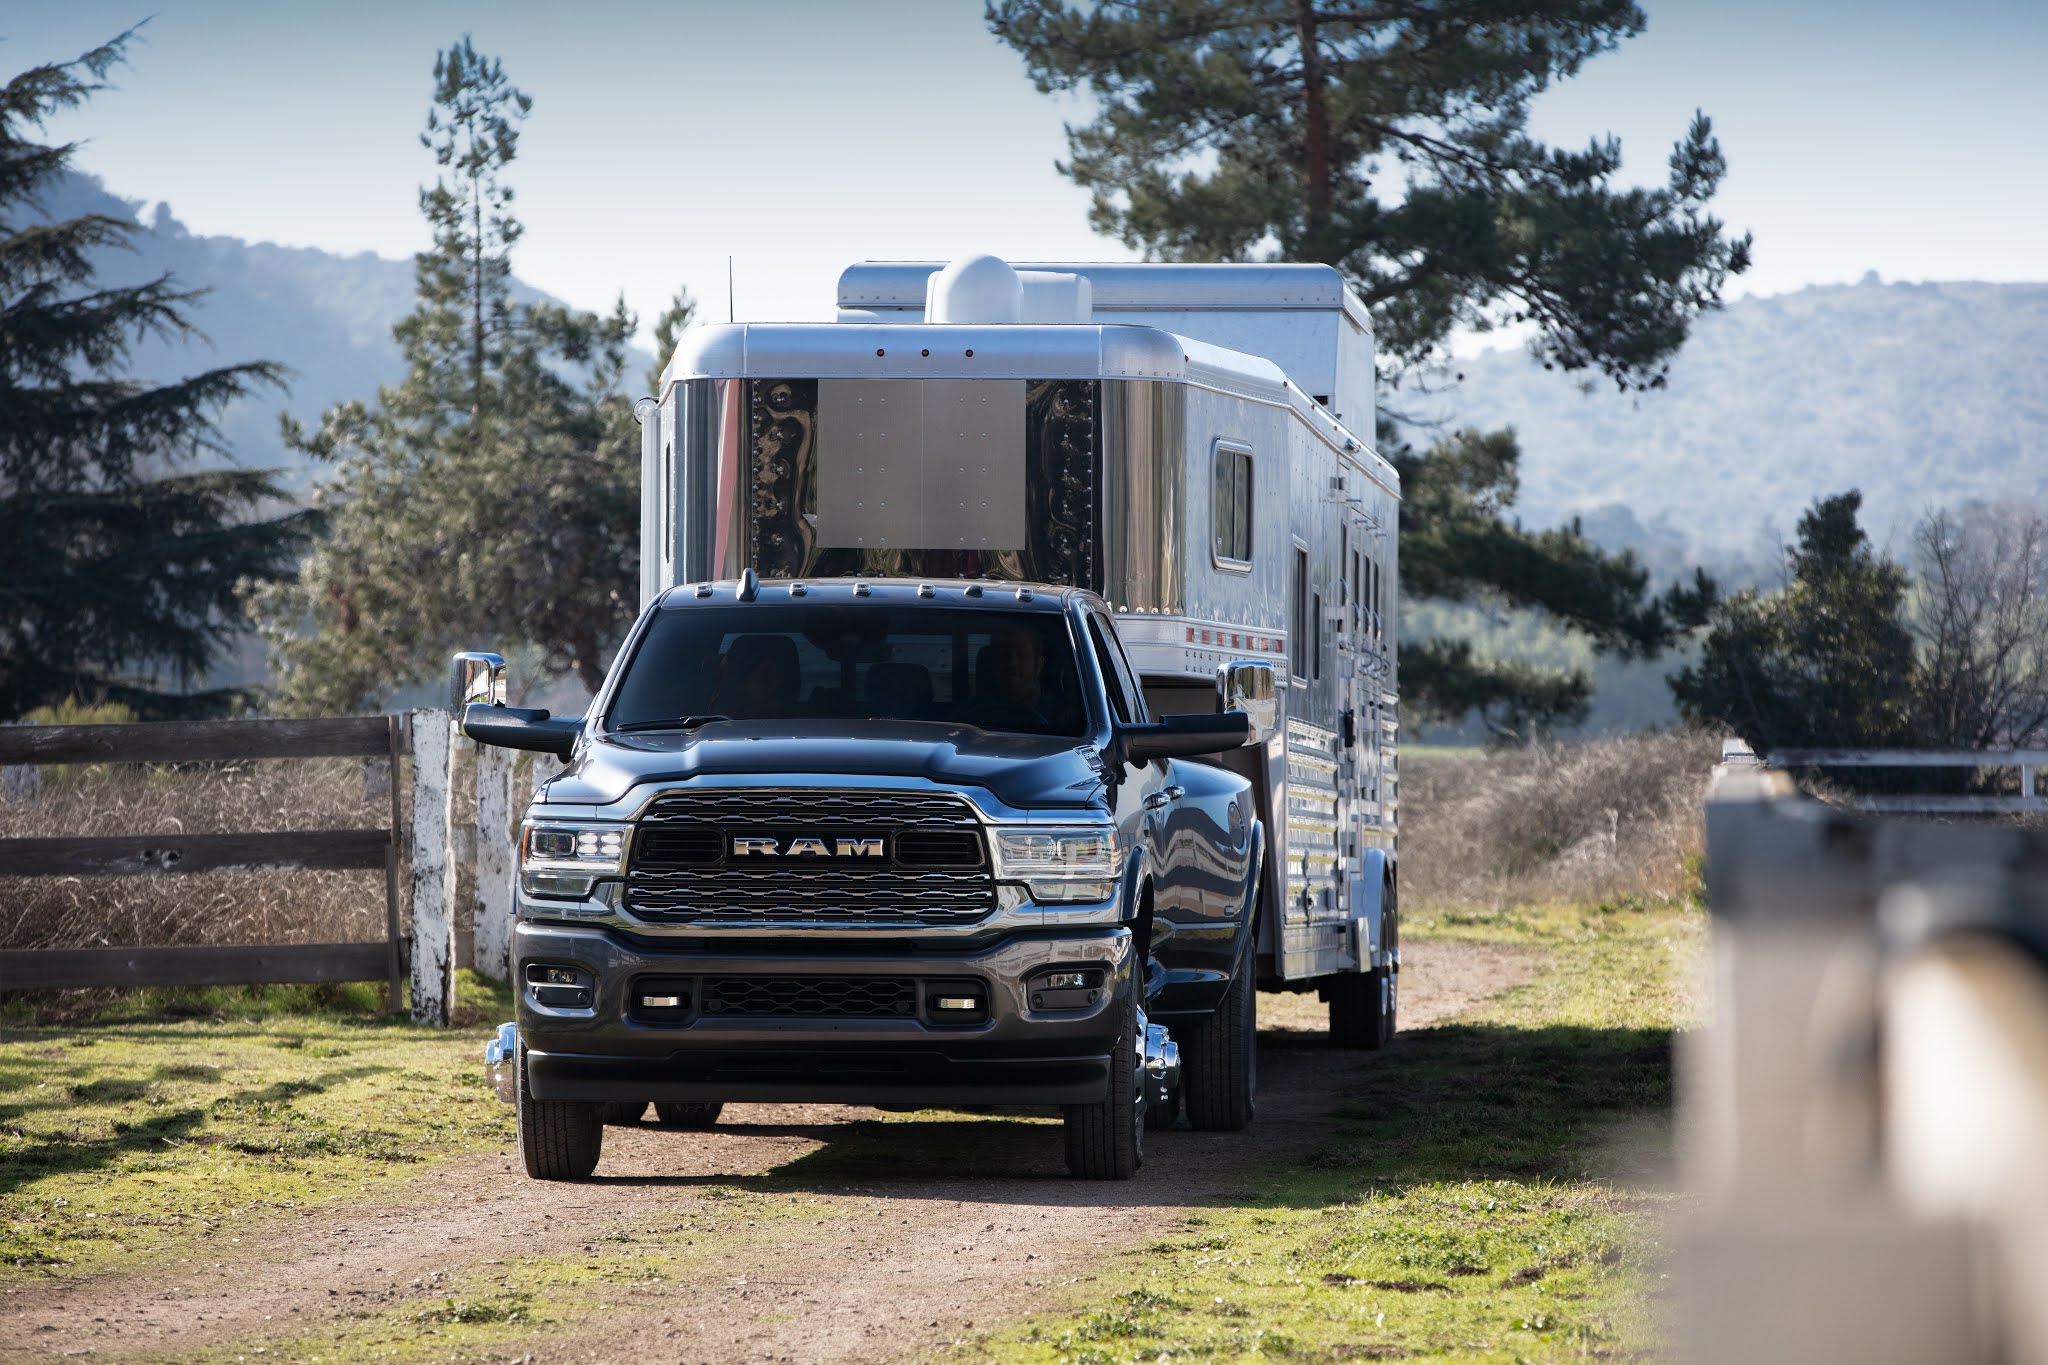 Melloy Dodge: General Towing Tips With Your RAM